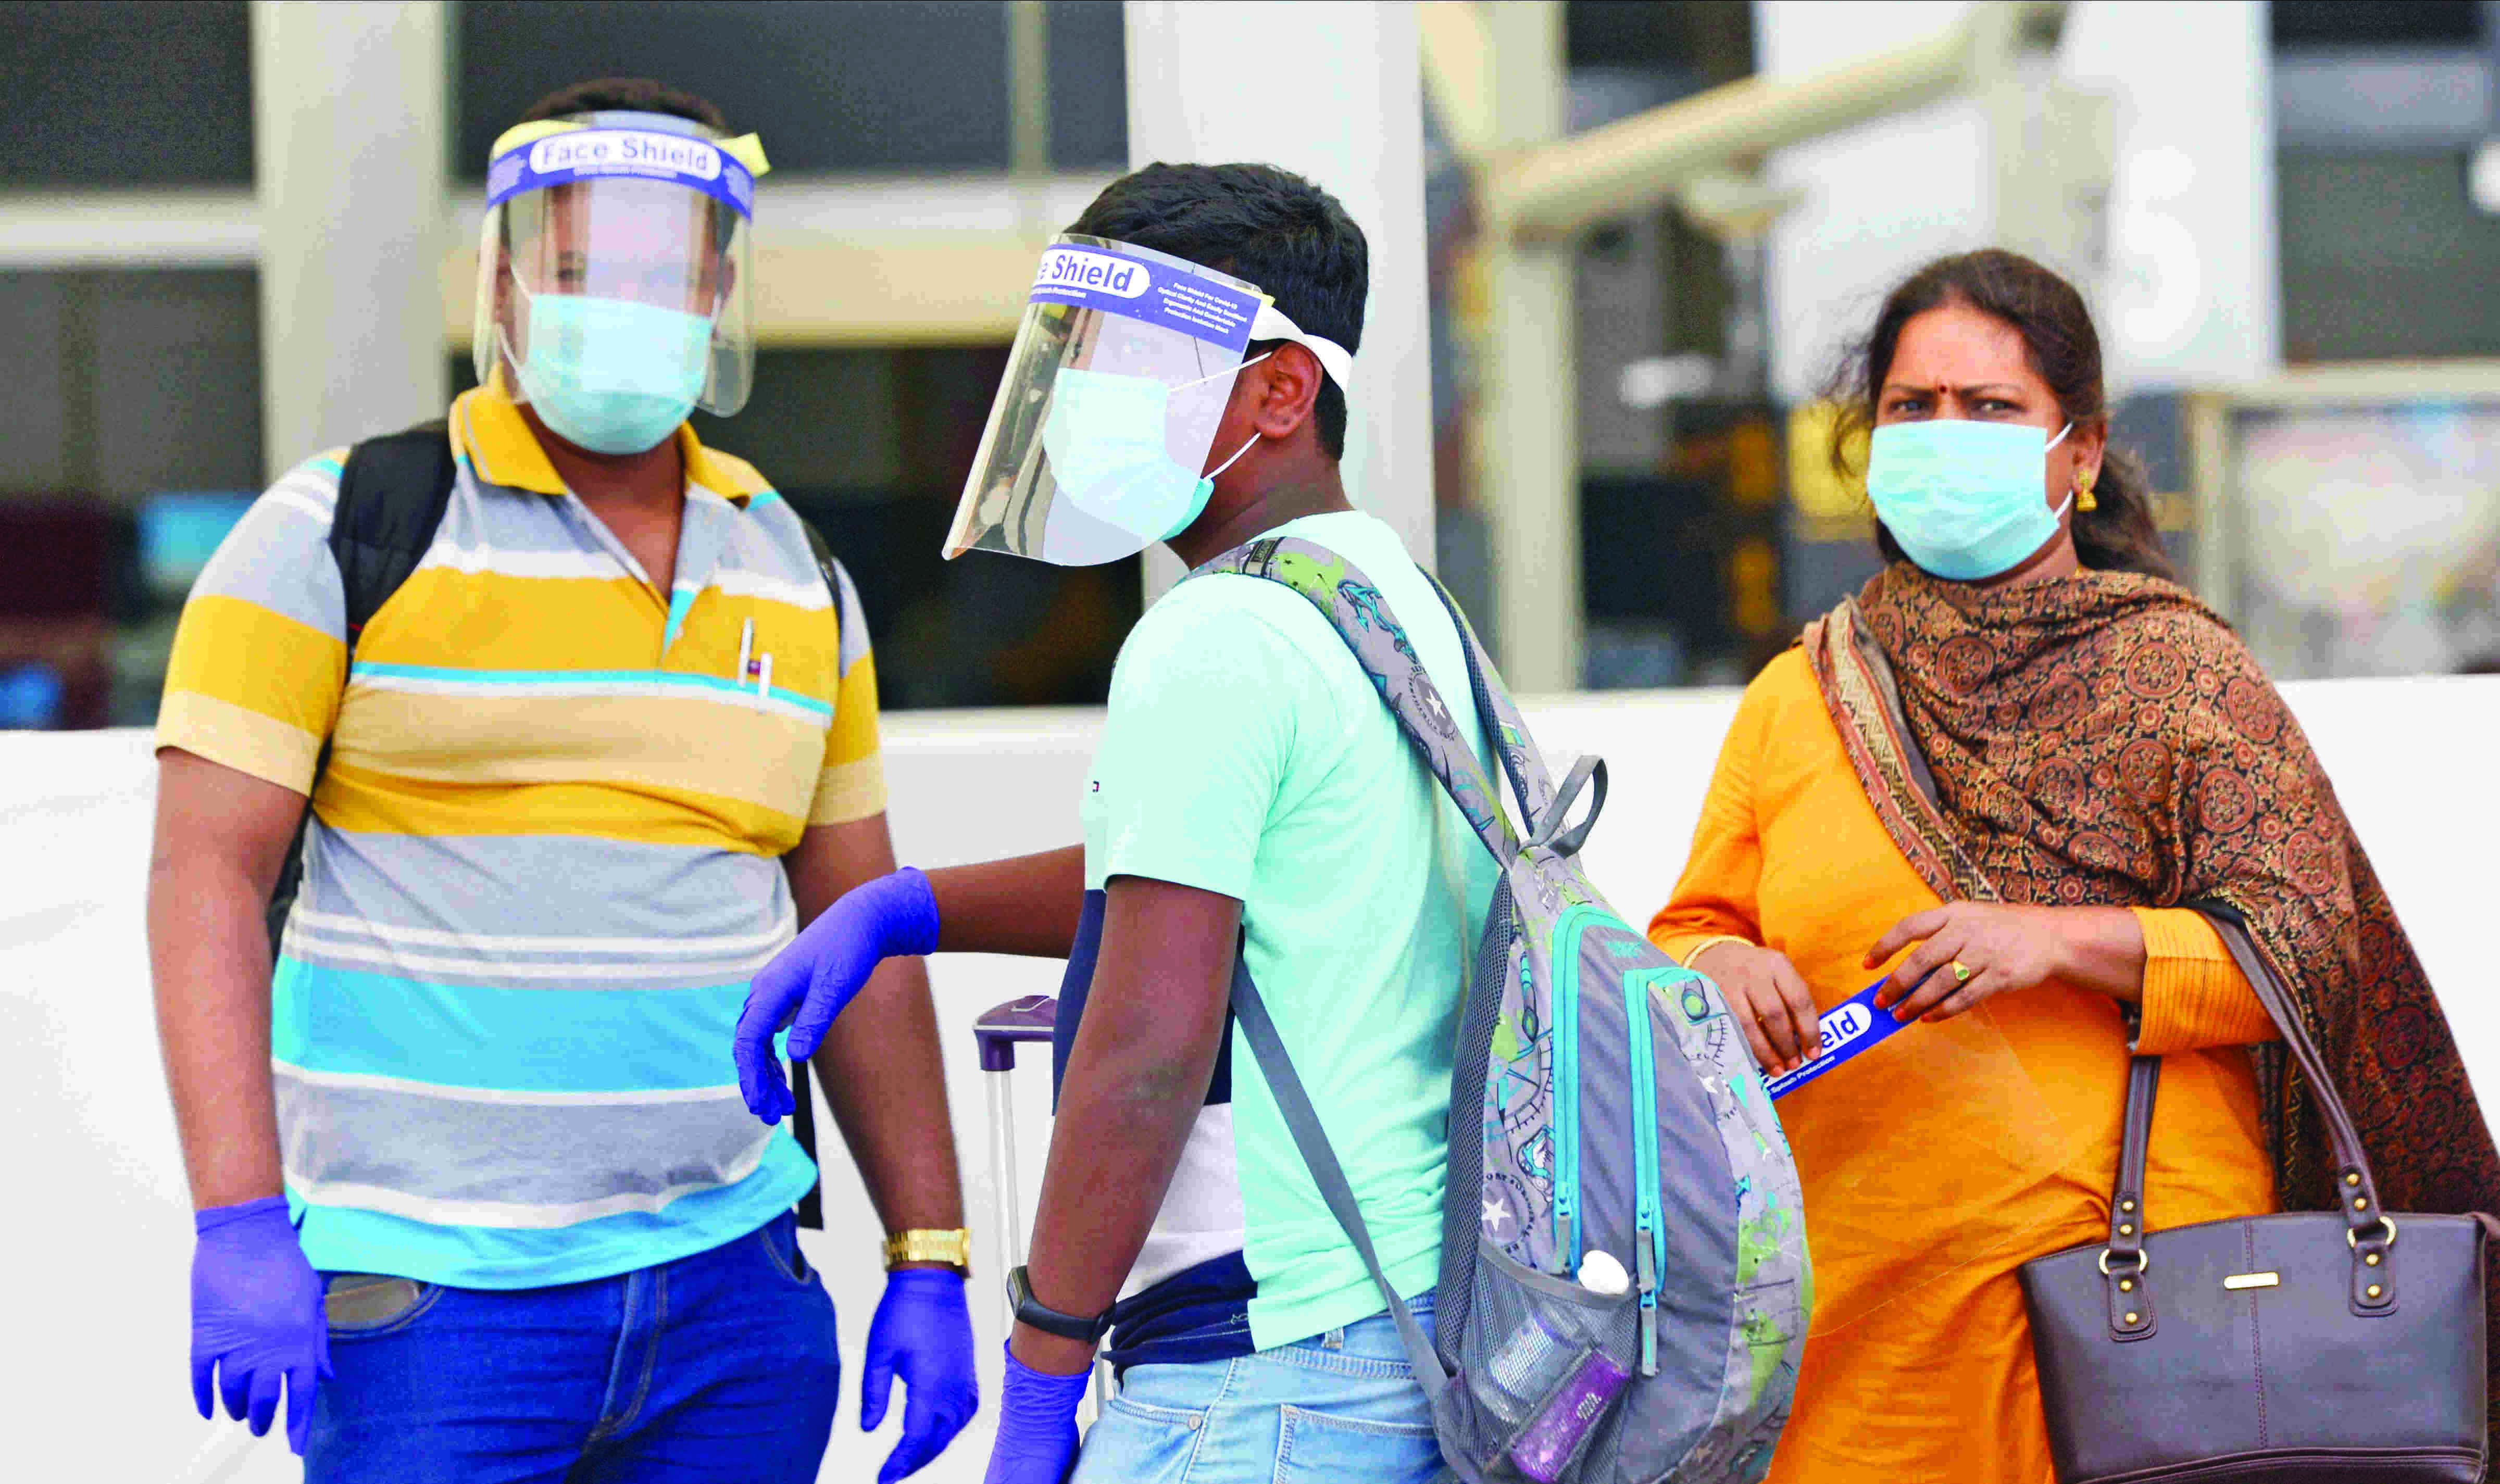 Deboard passengers who refuse to wear face mask in plane: DGCA